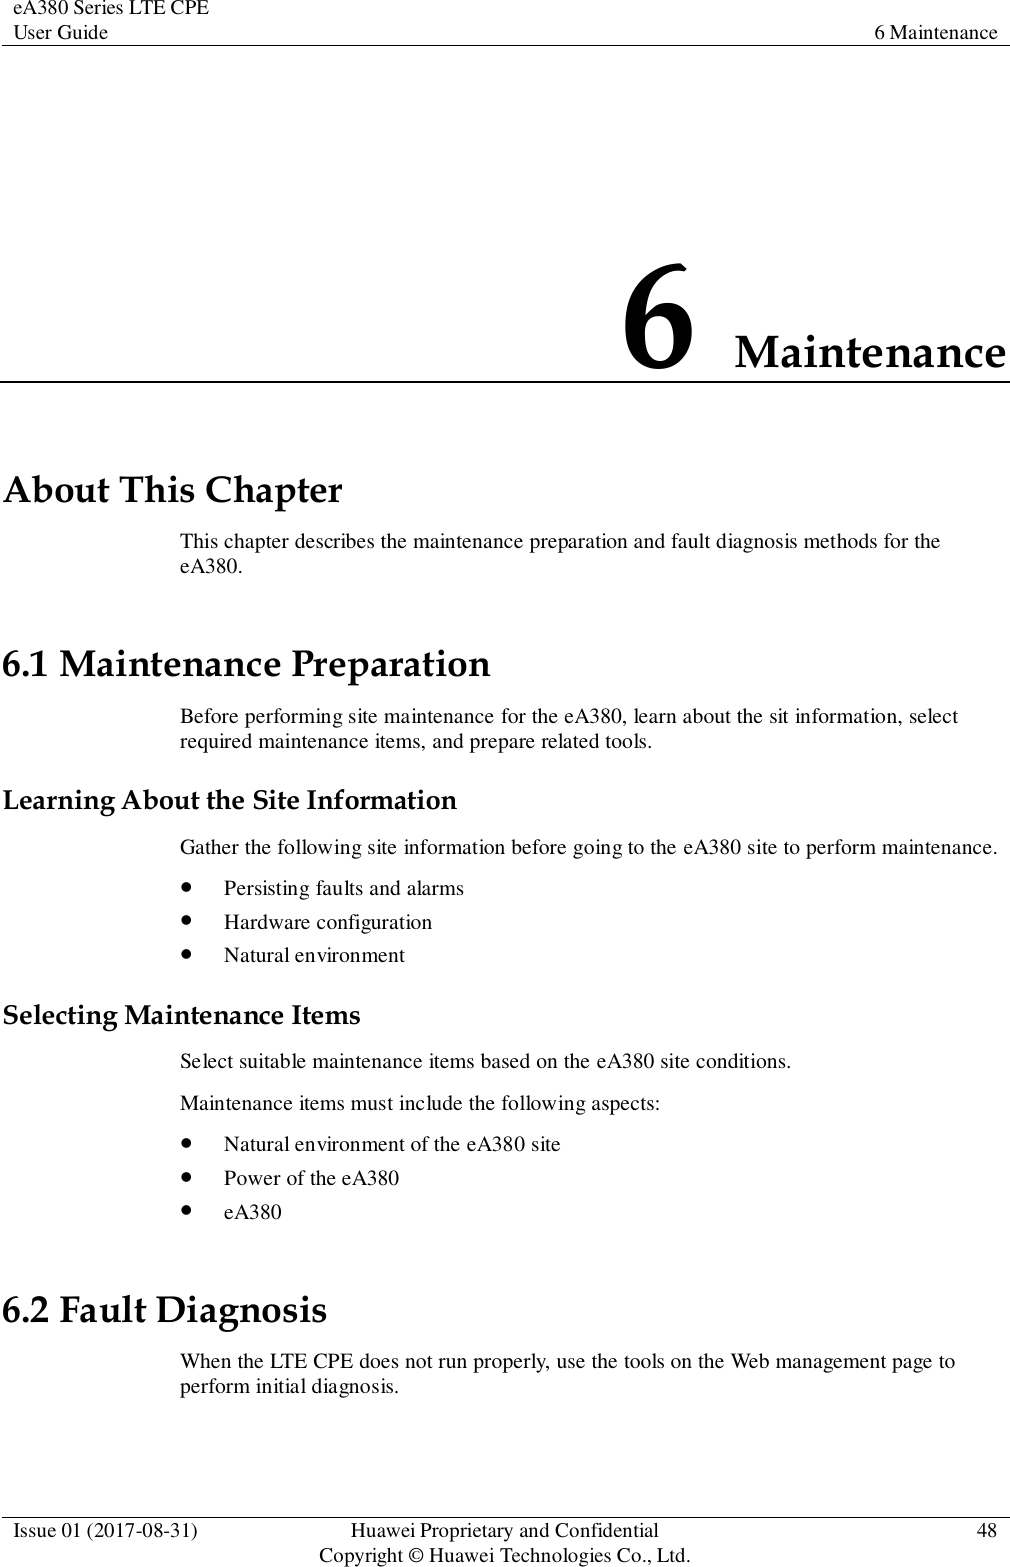 eA380 Series LTE CPE User Guide 6 Maintenance  Issue 01 (2017-08-31) Huawei Proprietary and Confidential                                     Copyright © Huawei Technologies Co., Ltd. 48  6 Maintenance About This Chapter This chapter describes the maintenance preparation and fault diagnosis methods for the eA380. 6.1 Maintenance Preparation Before performing site maintenance for the eA380, learn about the sit information, select required maintenance items, and prepare related tools. Learning About the Site Information Gather the following site information before going to the eA380 site to perform maintenance.    Persisting faults and alarms  Hardware configuration  Natural environment Selecting Maintenance Items Select suitable maintenance items based on the eA380 site conditions.   Maintenance items must include the following aspects:  Natural environment of the eA380 site  Power of the eA380  eA380 6.2 Fault Diagnosis When the LTE CPE does not run properly, use the tools on the Web management page to perform initial diagnosis. 